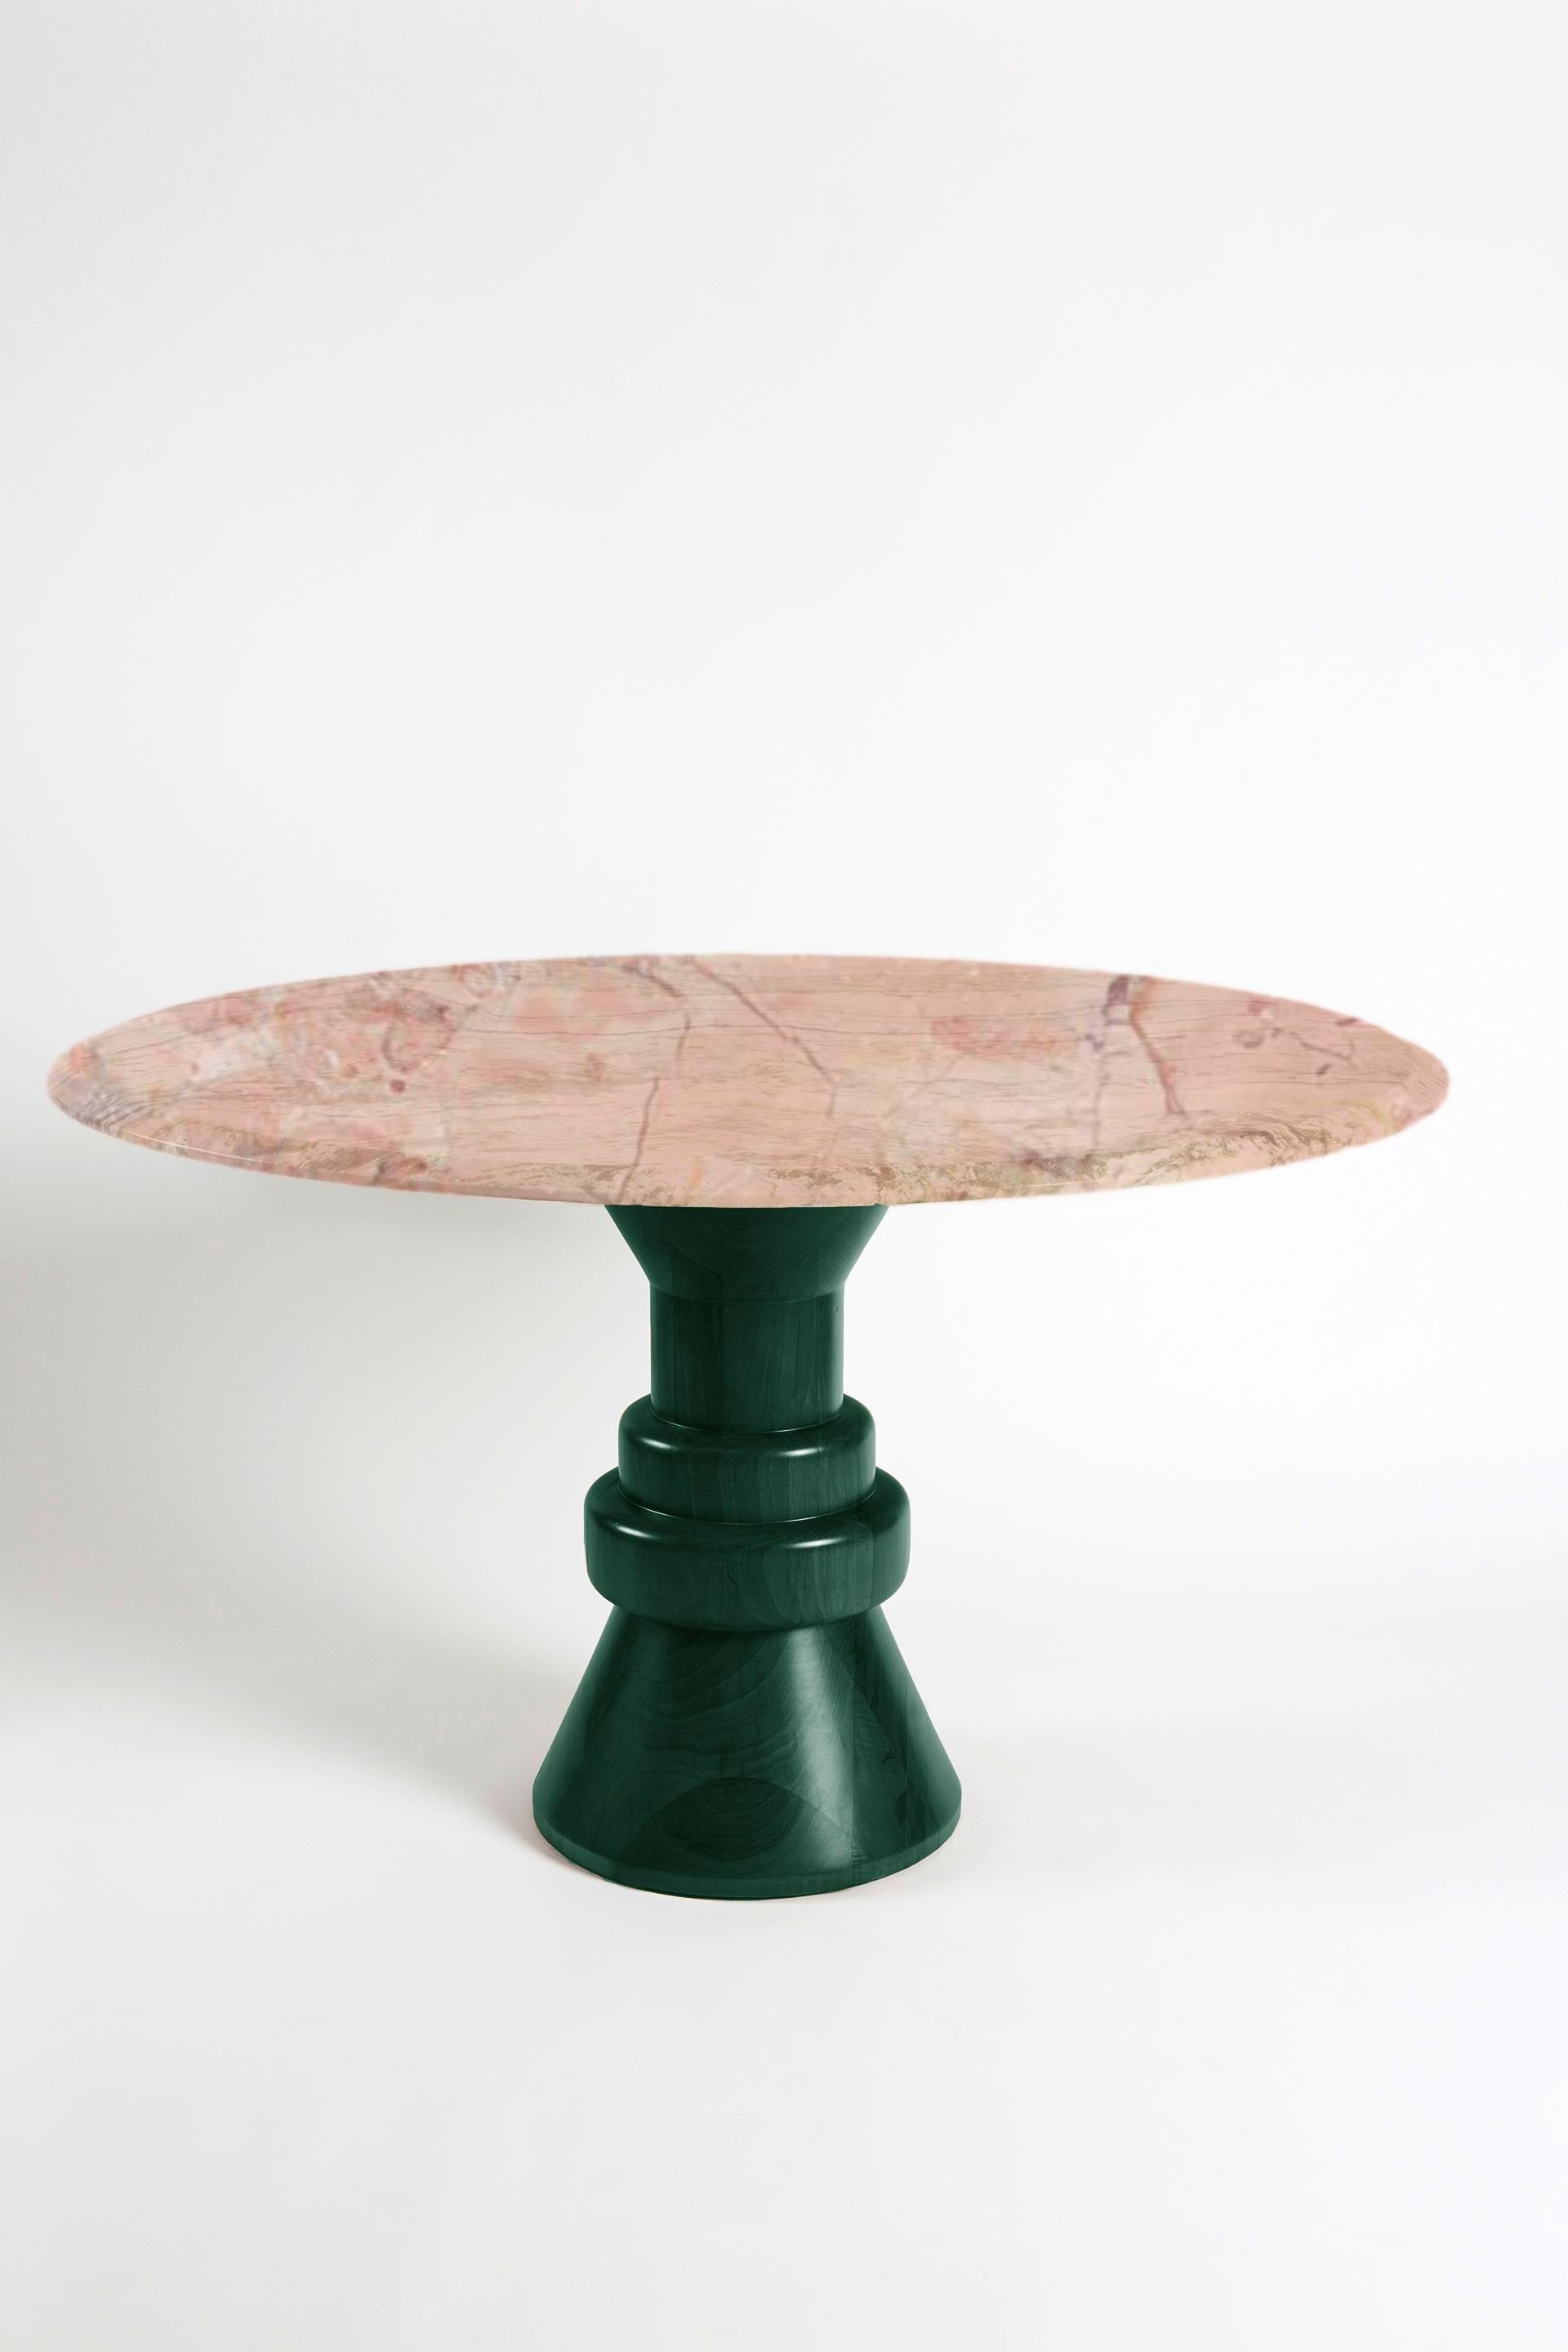 21st Century Red Marble Round Dining Table with Sculptural Black Wooden Base For Sale 4